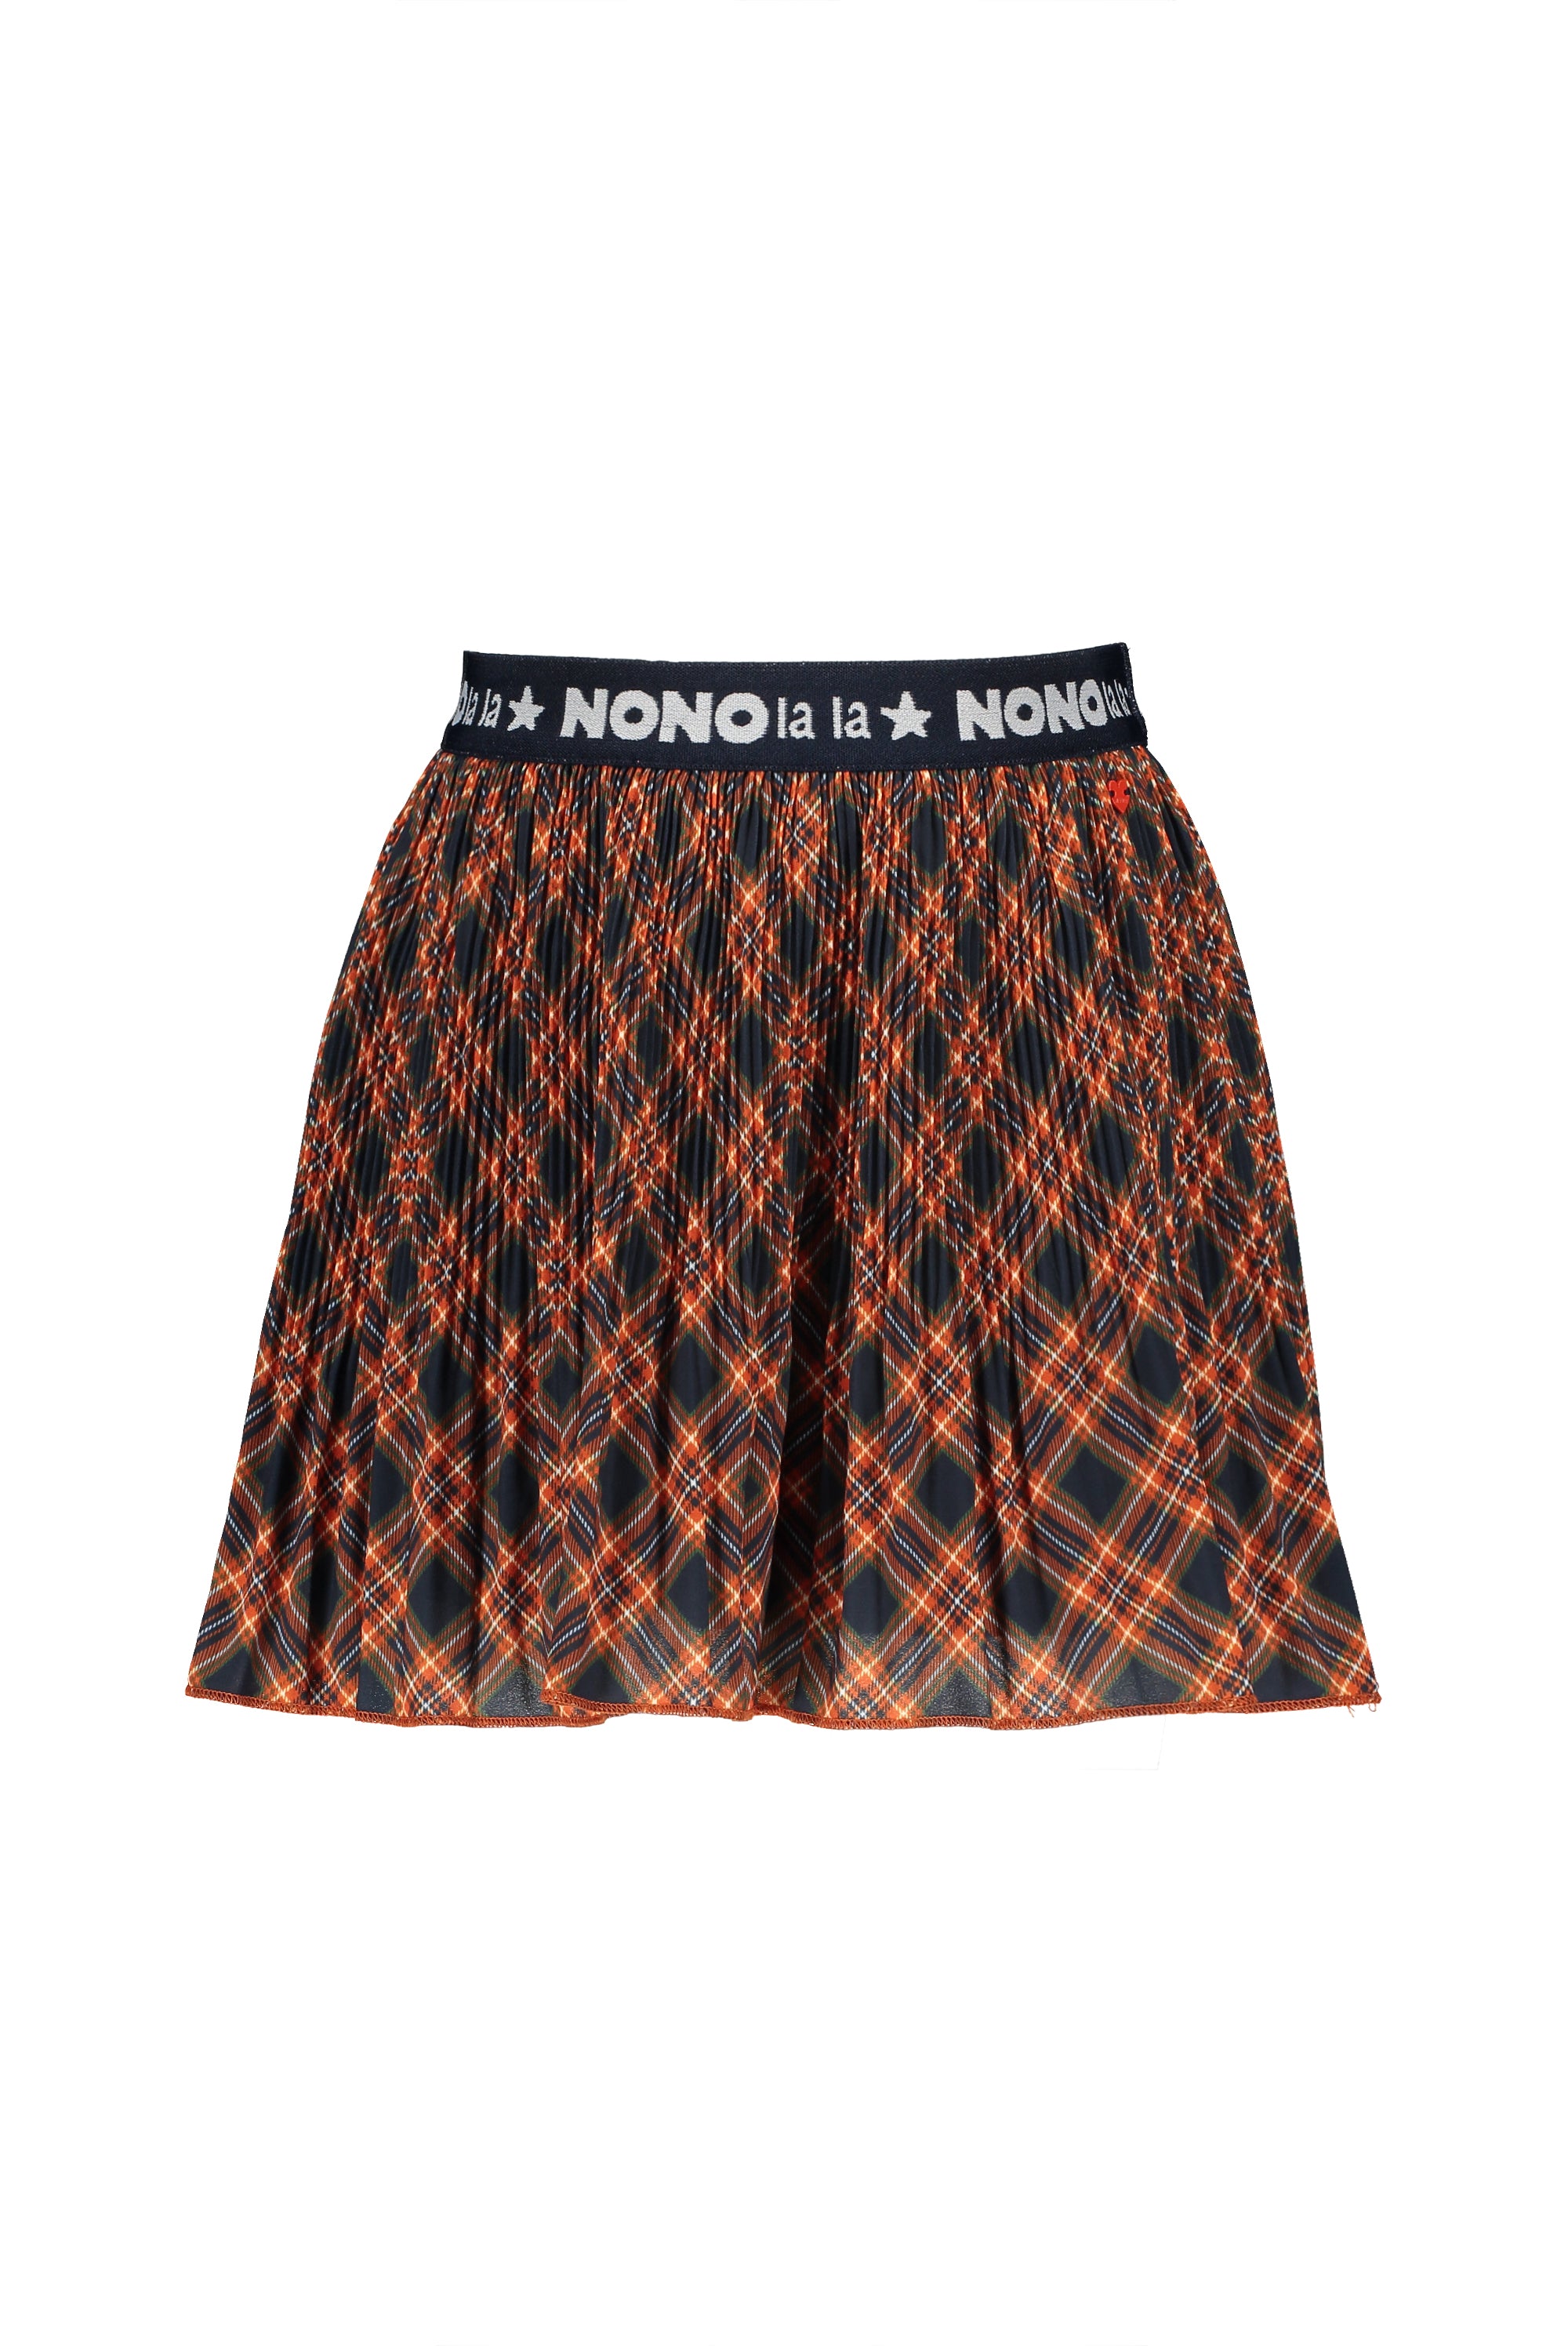 NoNo NulanB short bias check skirt with fine pleated